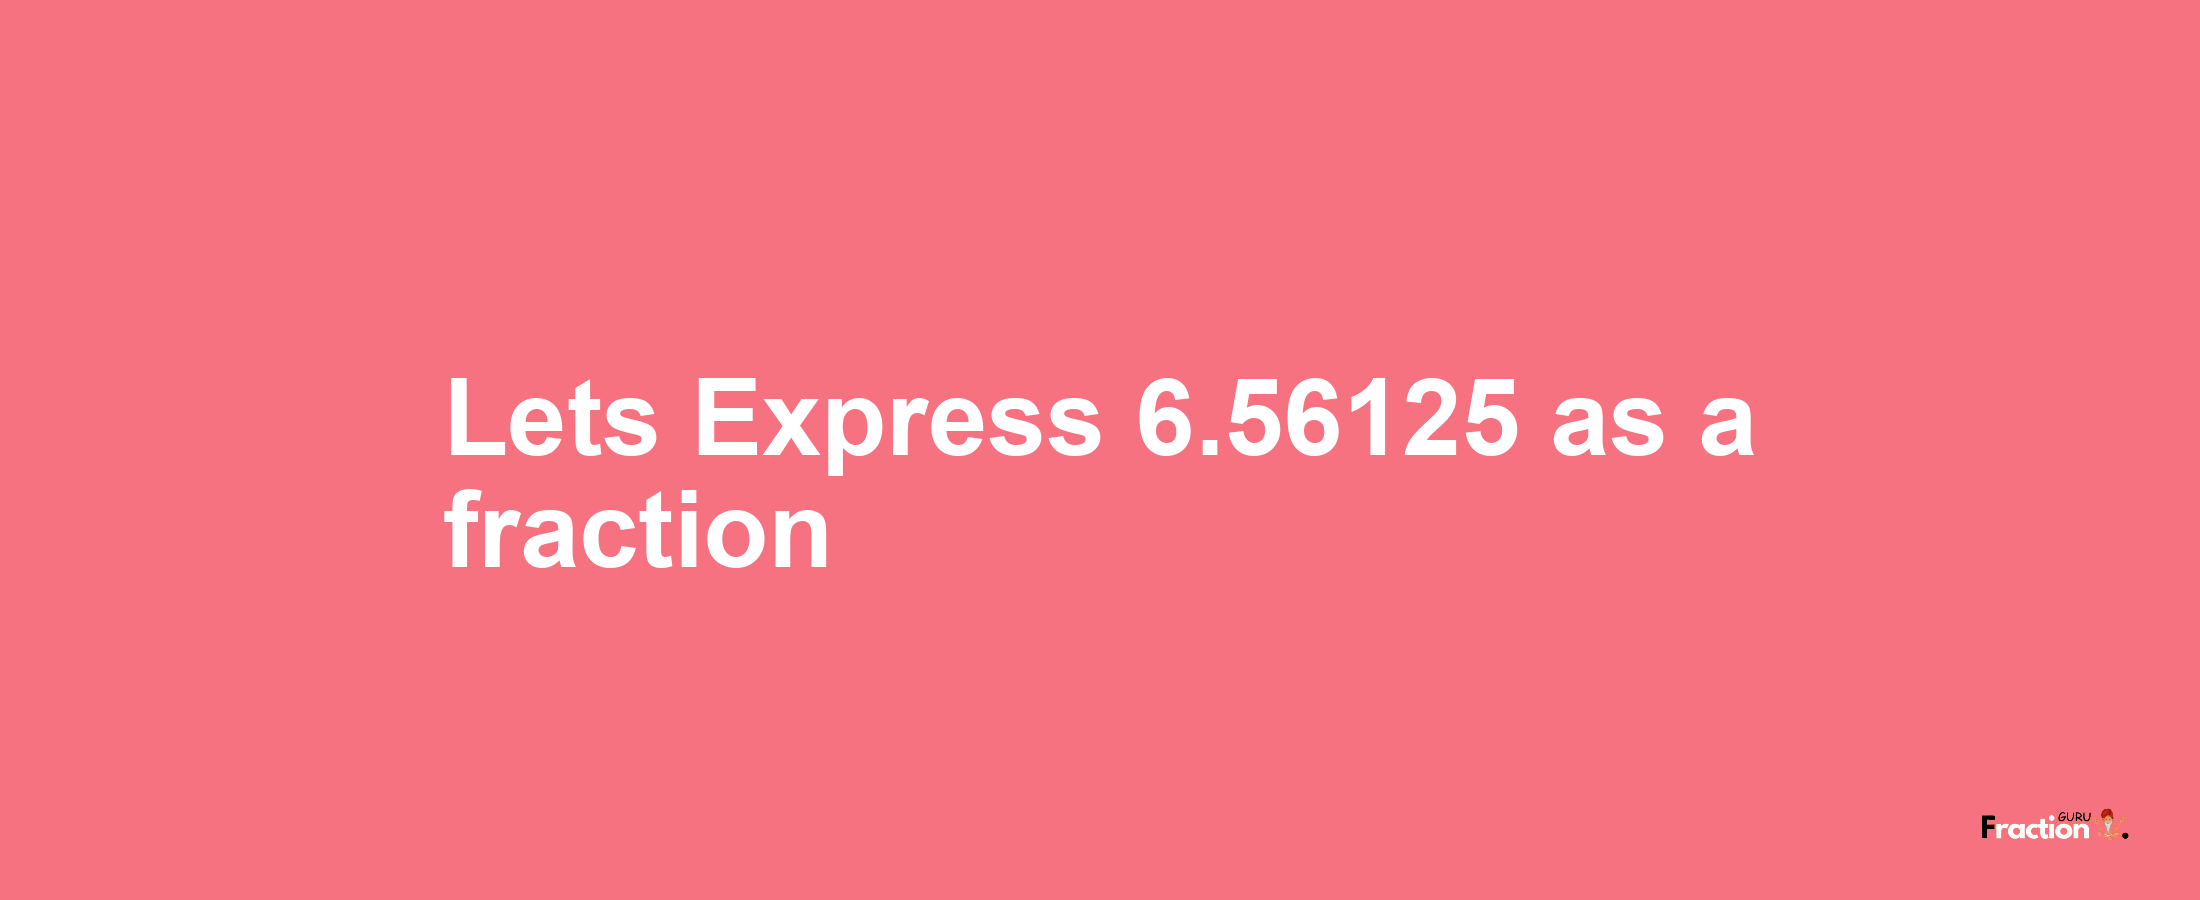 Lets Express 6.56125 as afraction